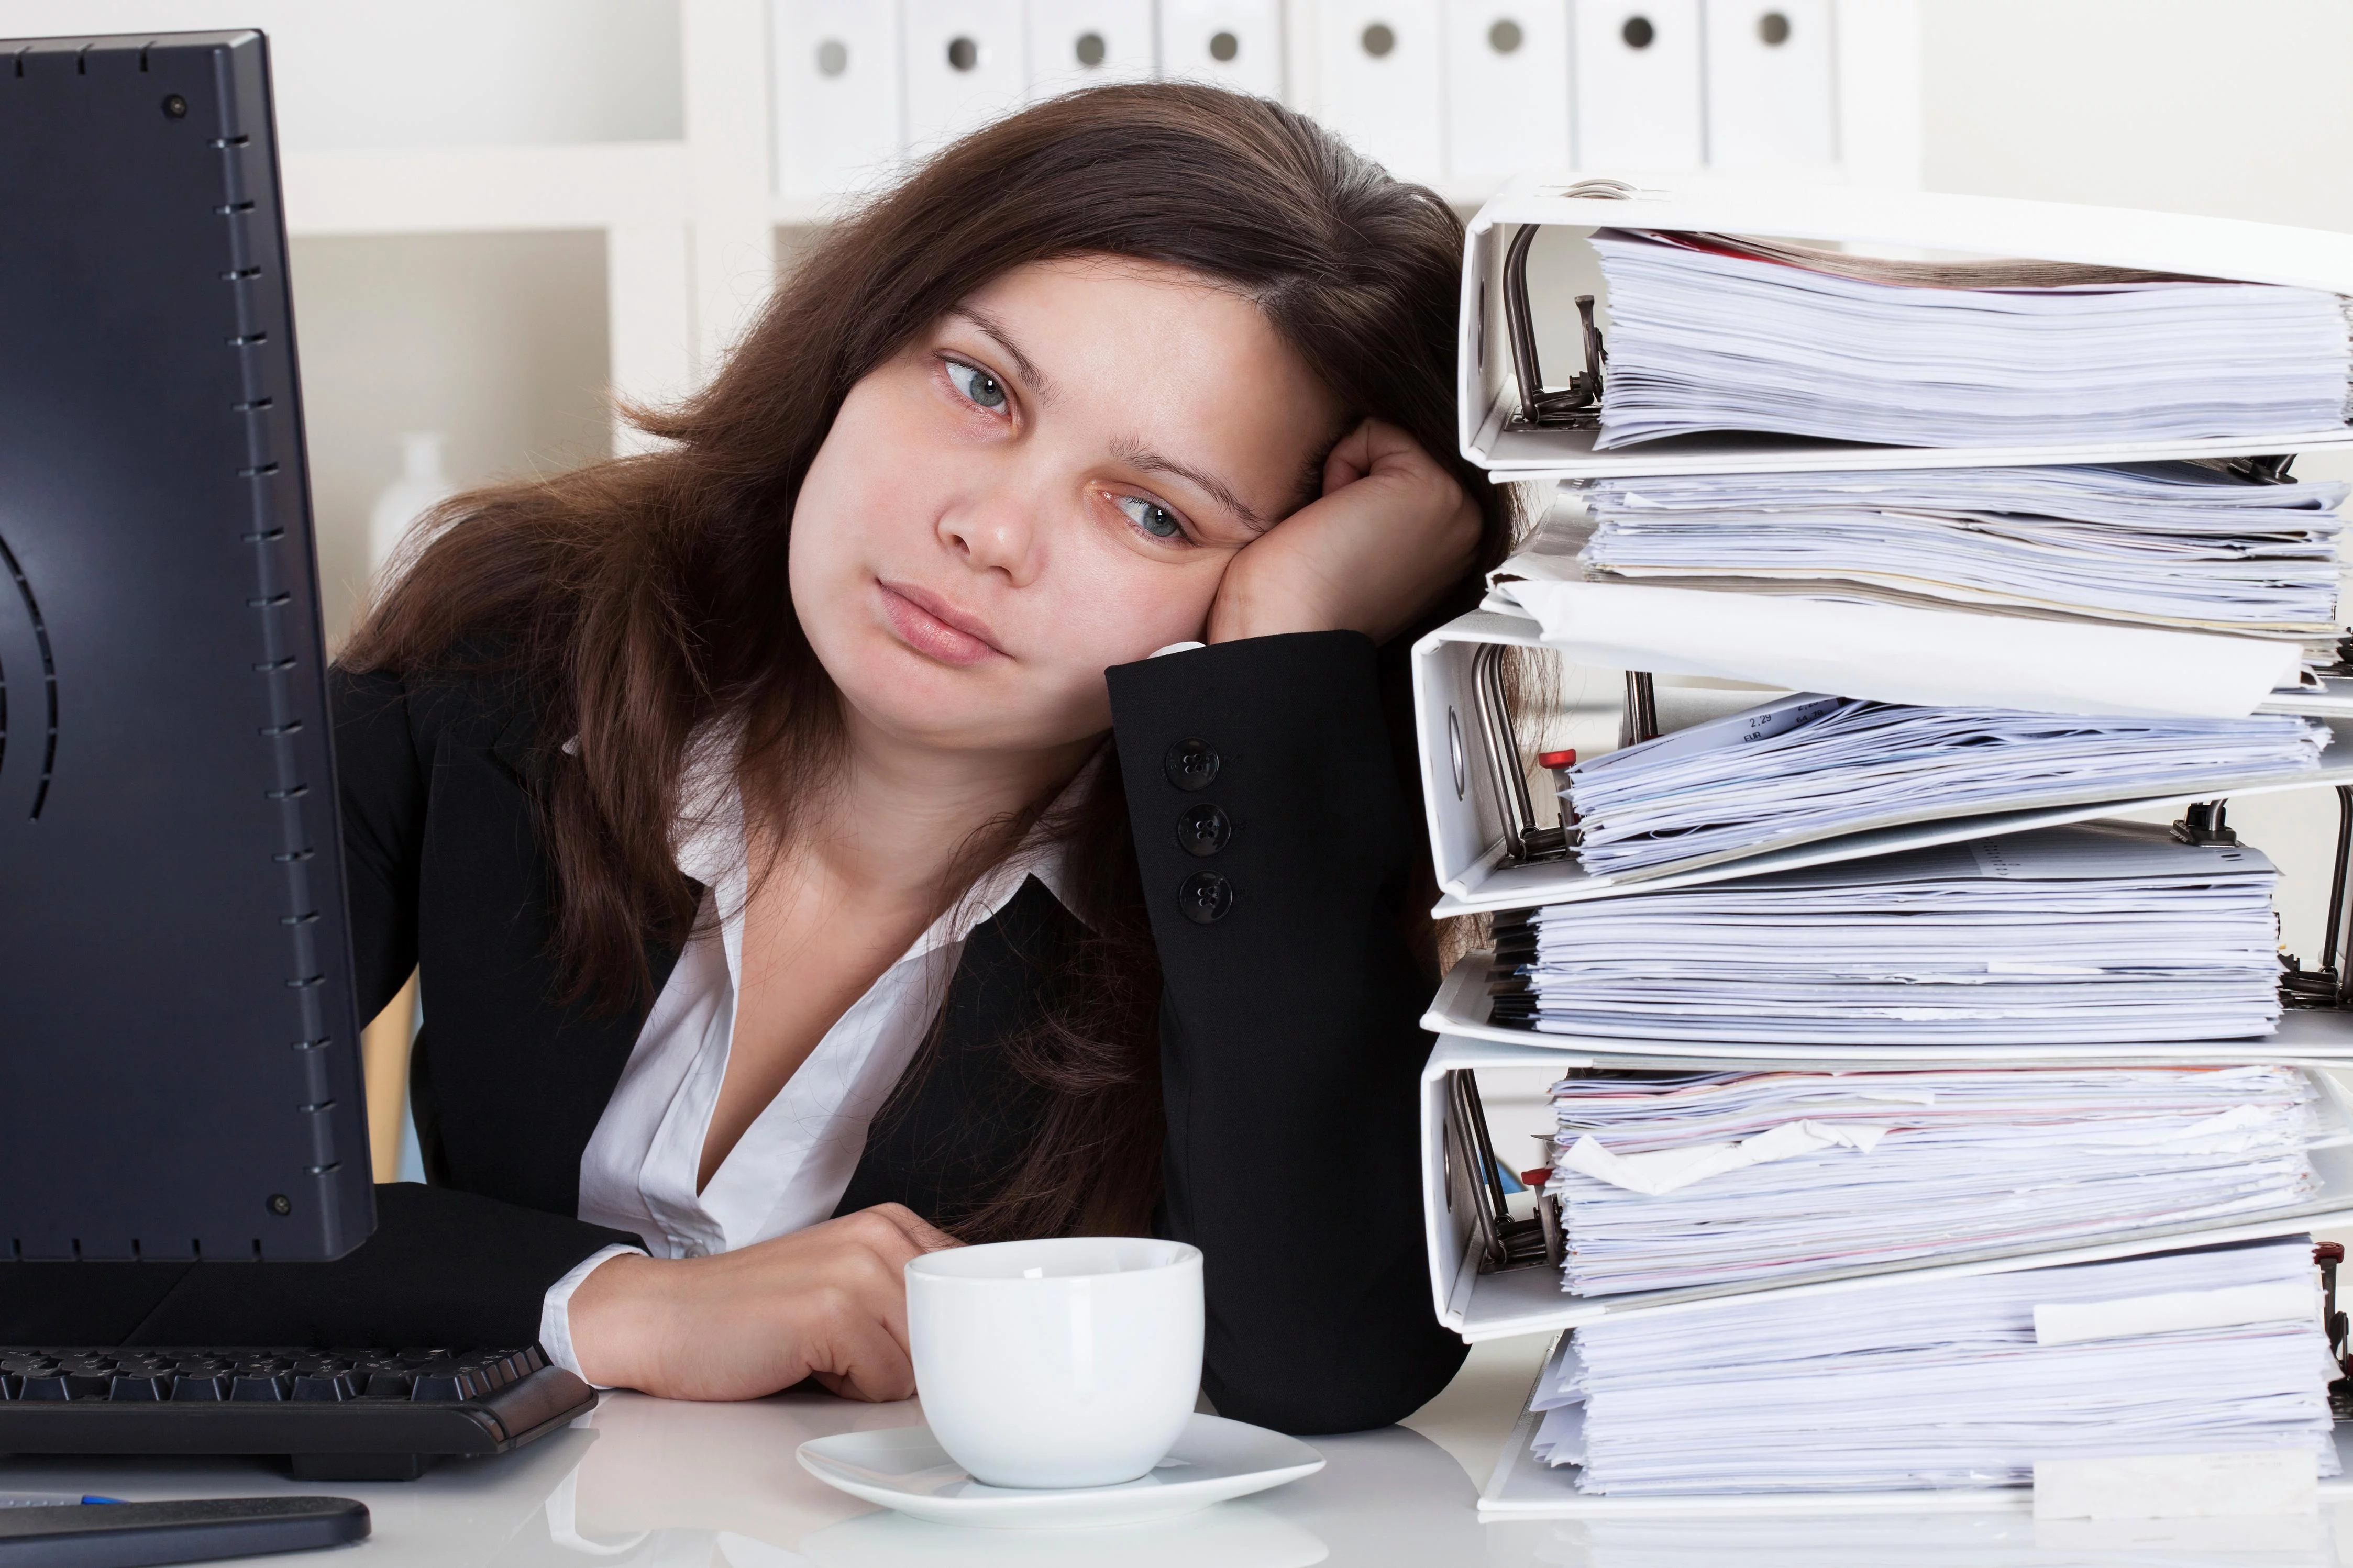 7 Warning Signs You Might be a Workaholic